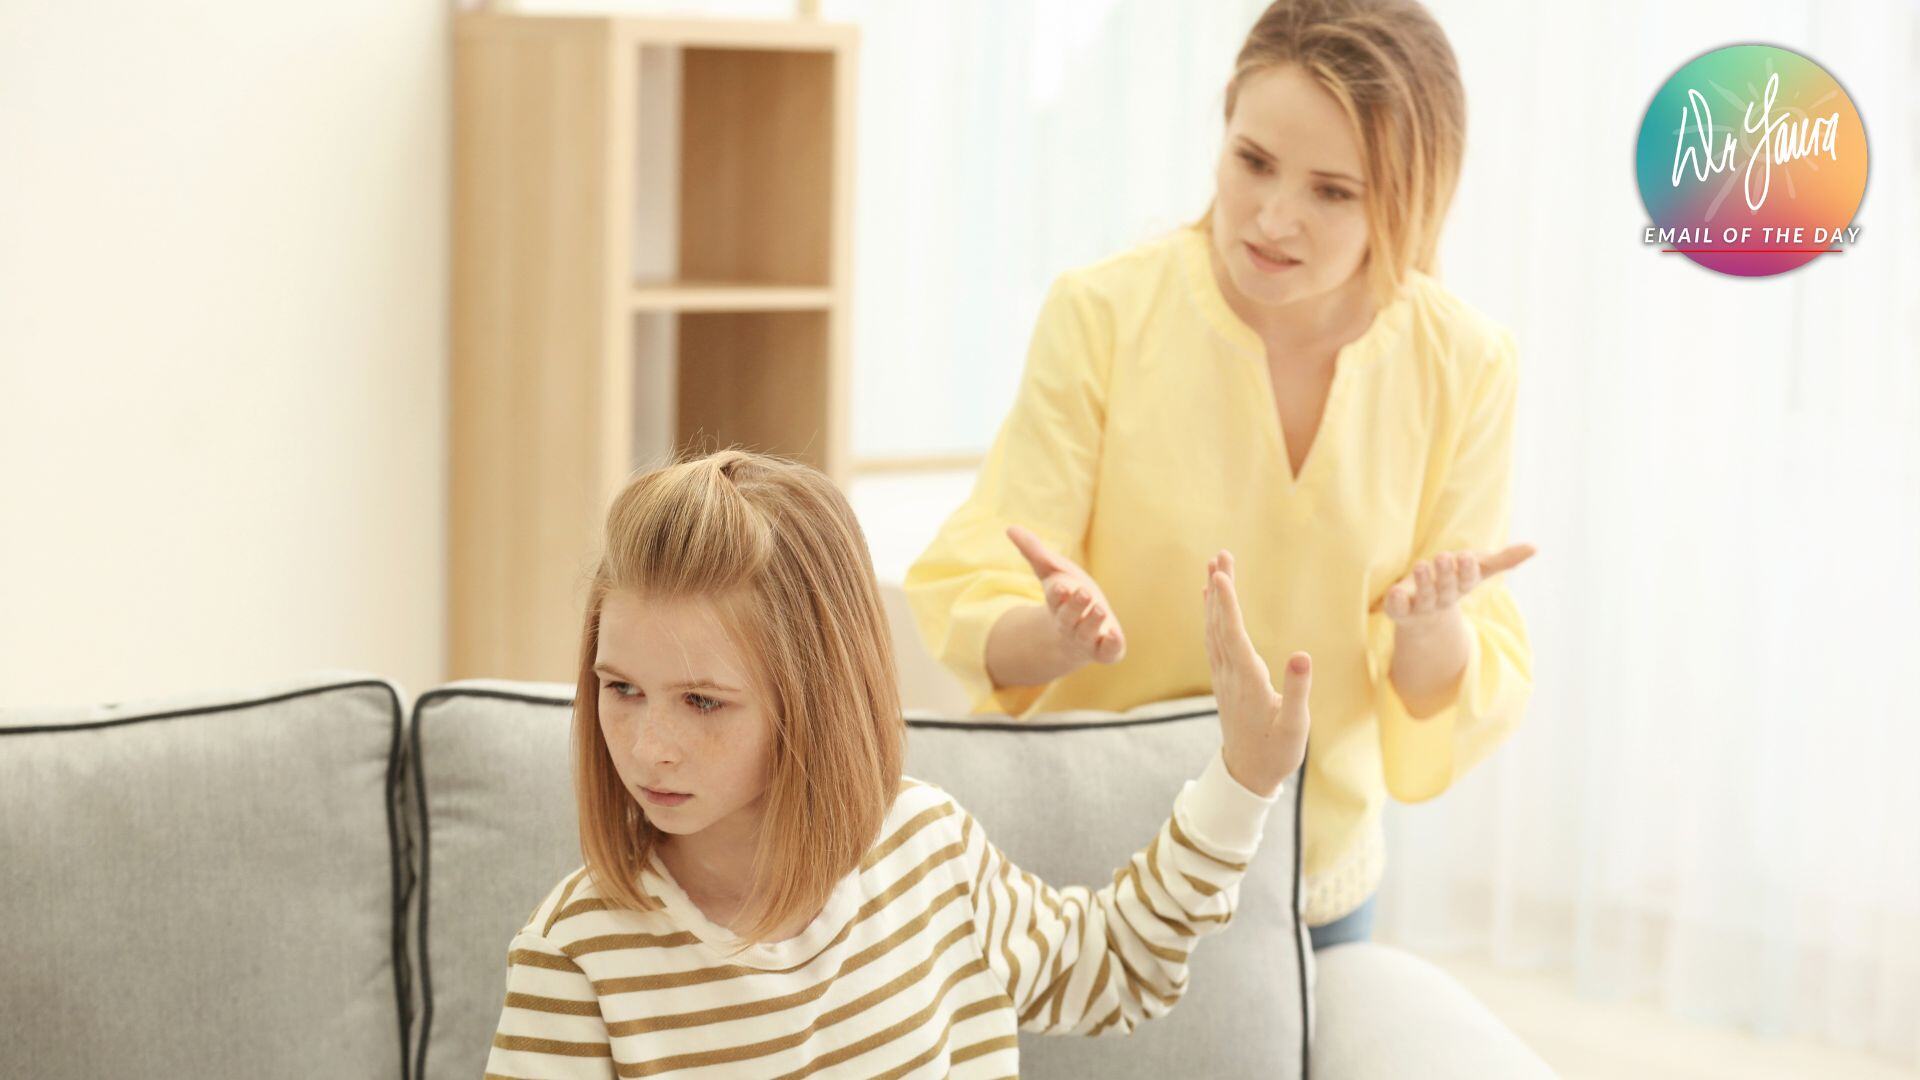 Email of the Day: I Didn't Let My Stepdaughter Ruin Our Marriage